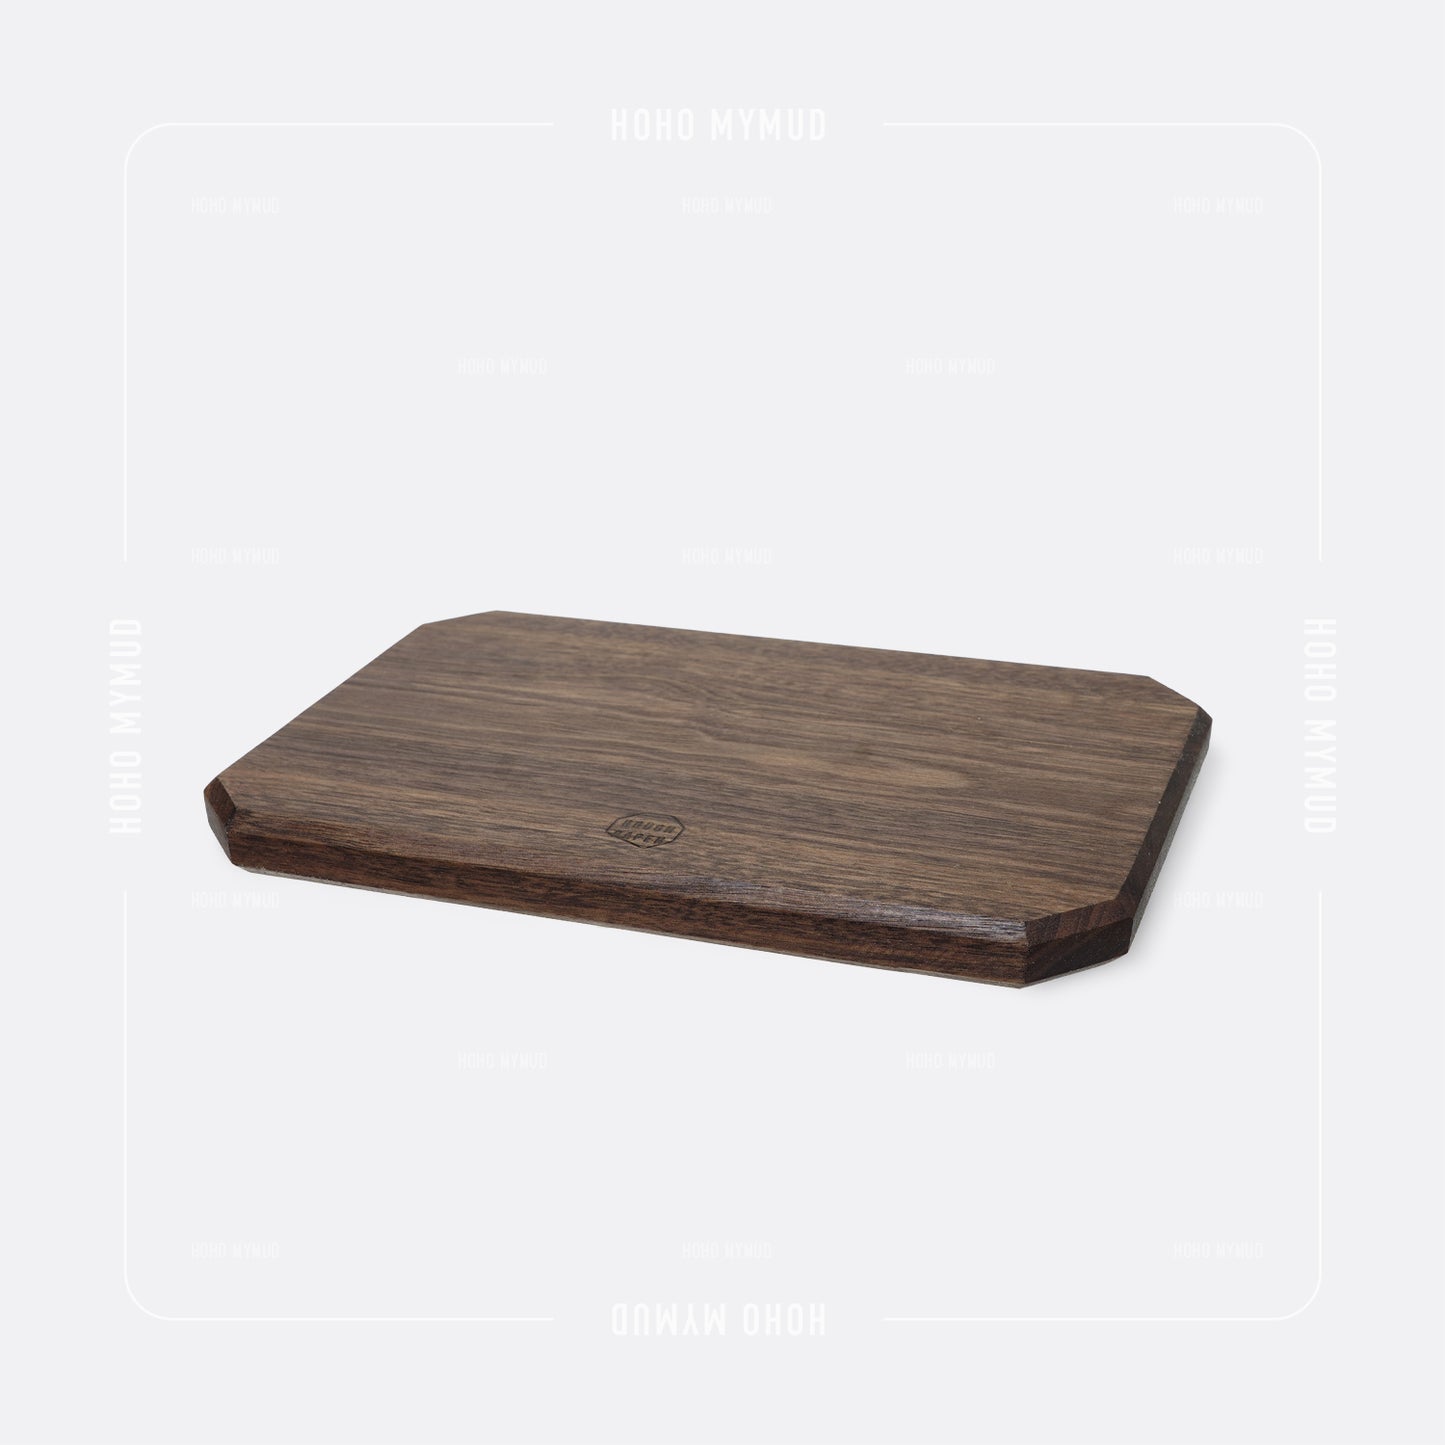 Rough Paper Wooden Cutting Board for Trangia Mess Tin 209 美國胡桃木製便攜砧板